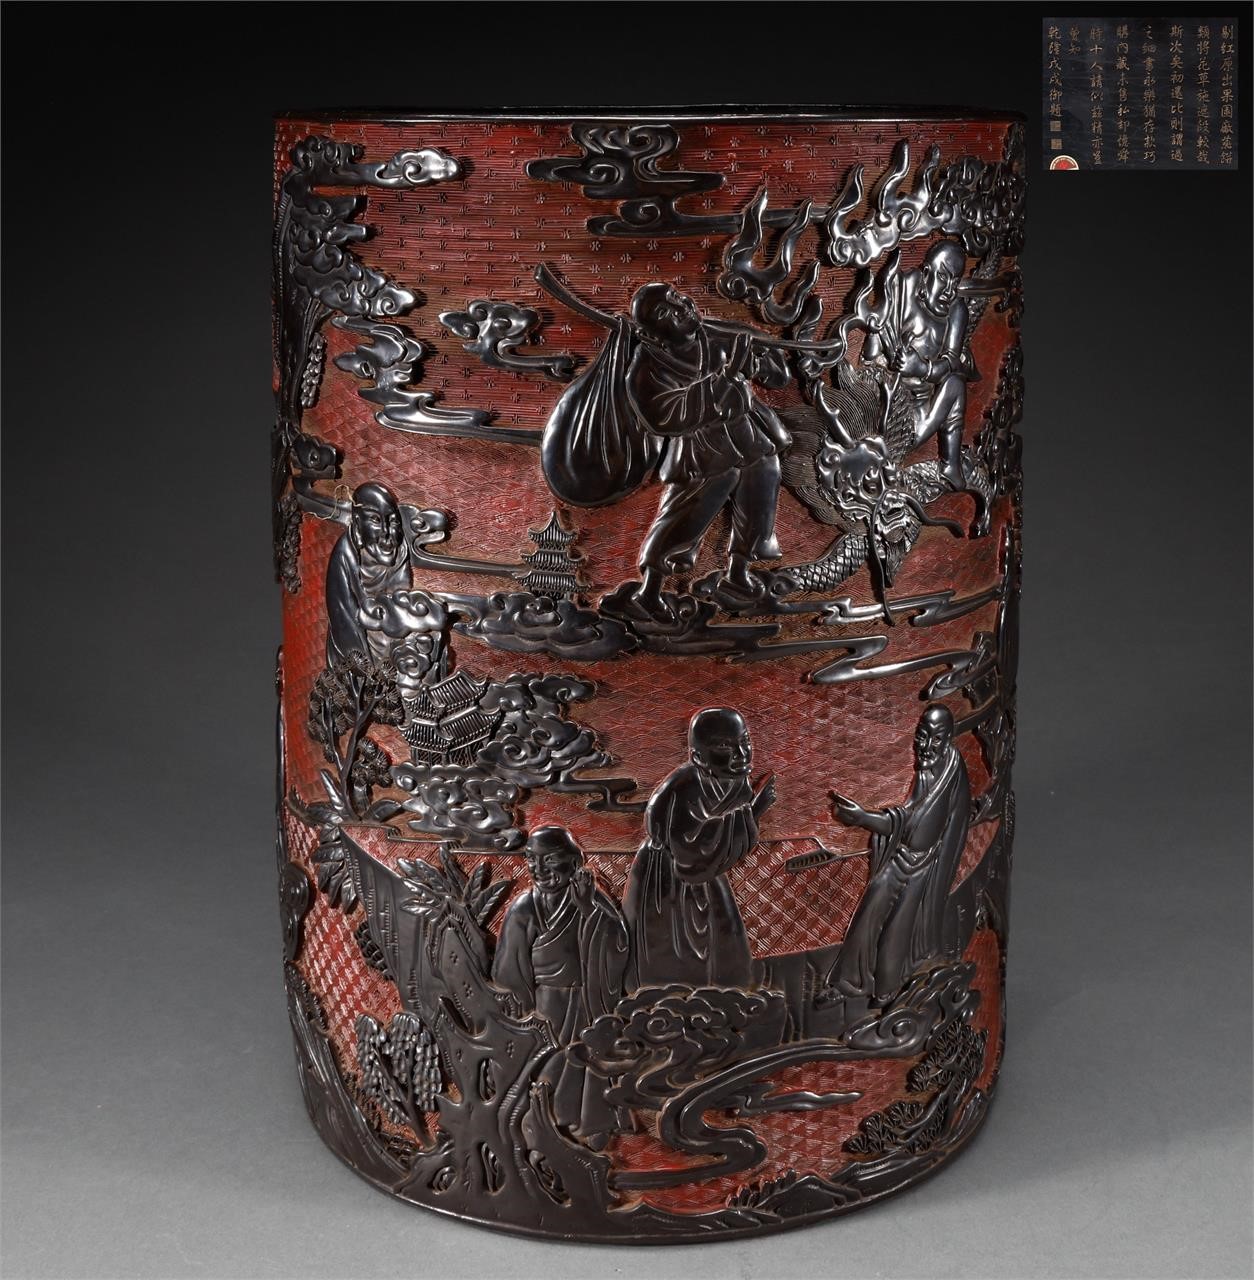 Lacquer-carved red figure story painting bucket in